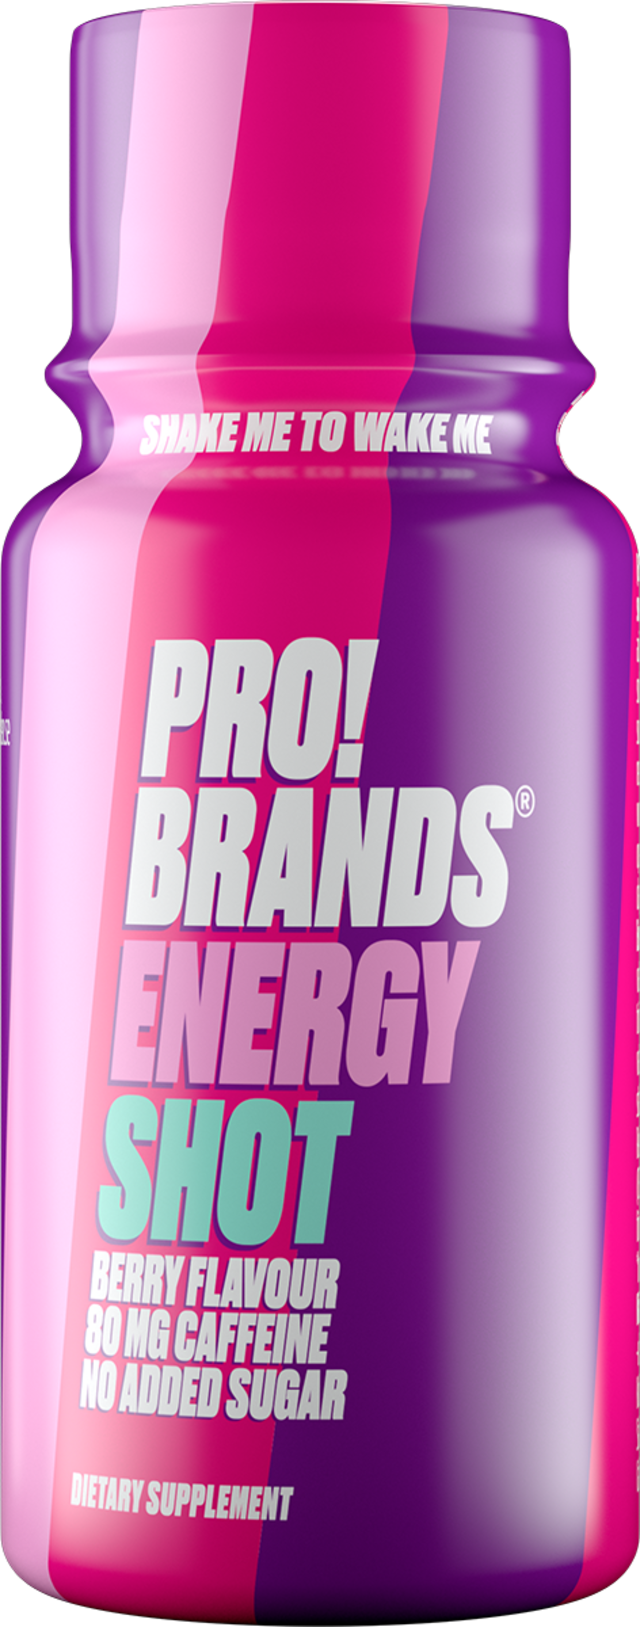 7024_PROBRANDS_ENERGY_SHOT_BERRY_60ML_x_12_PCS_Cpack.1.png